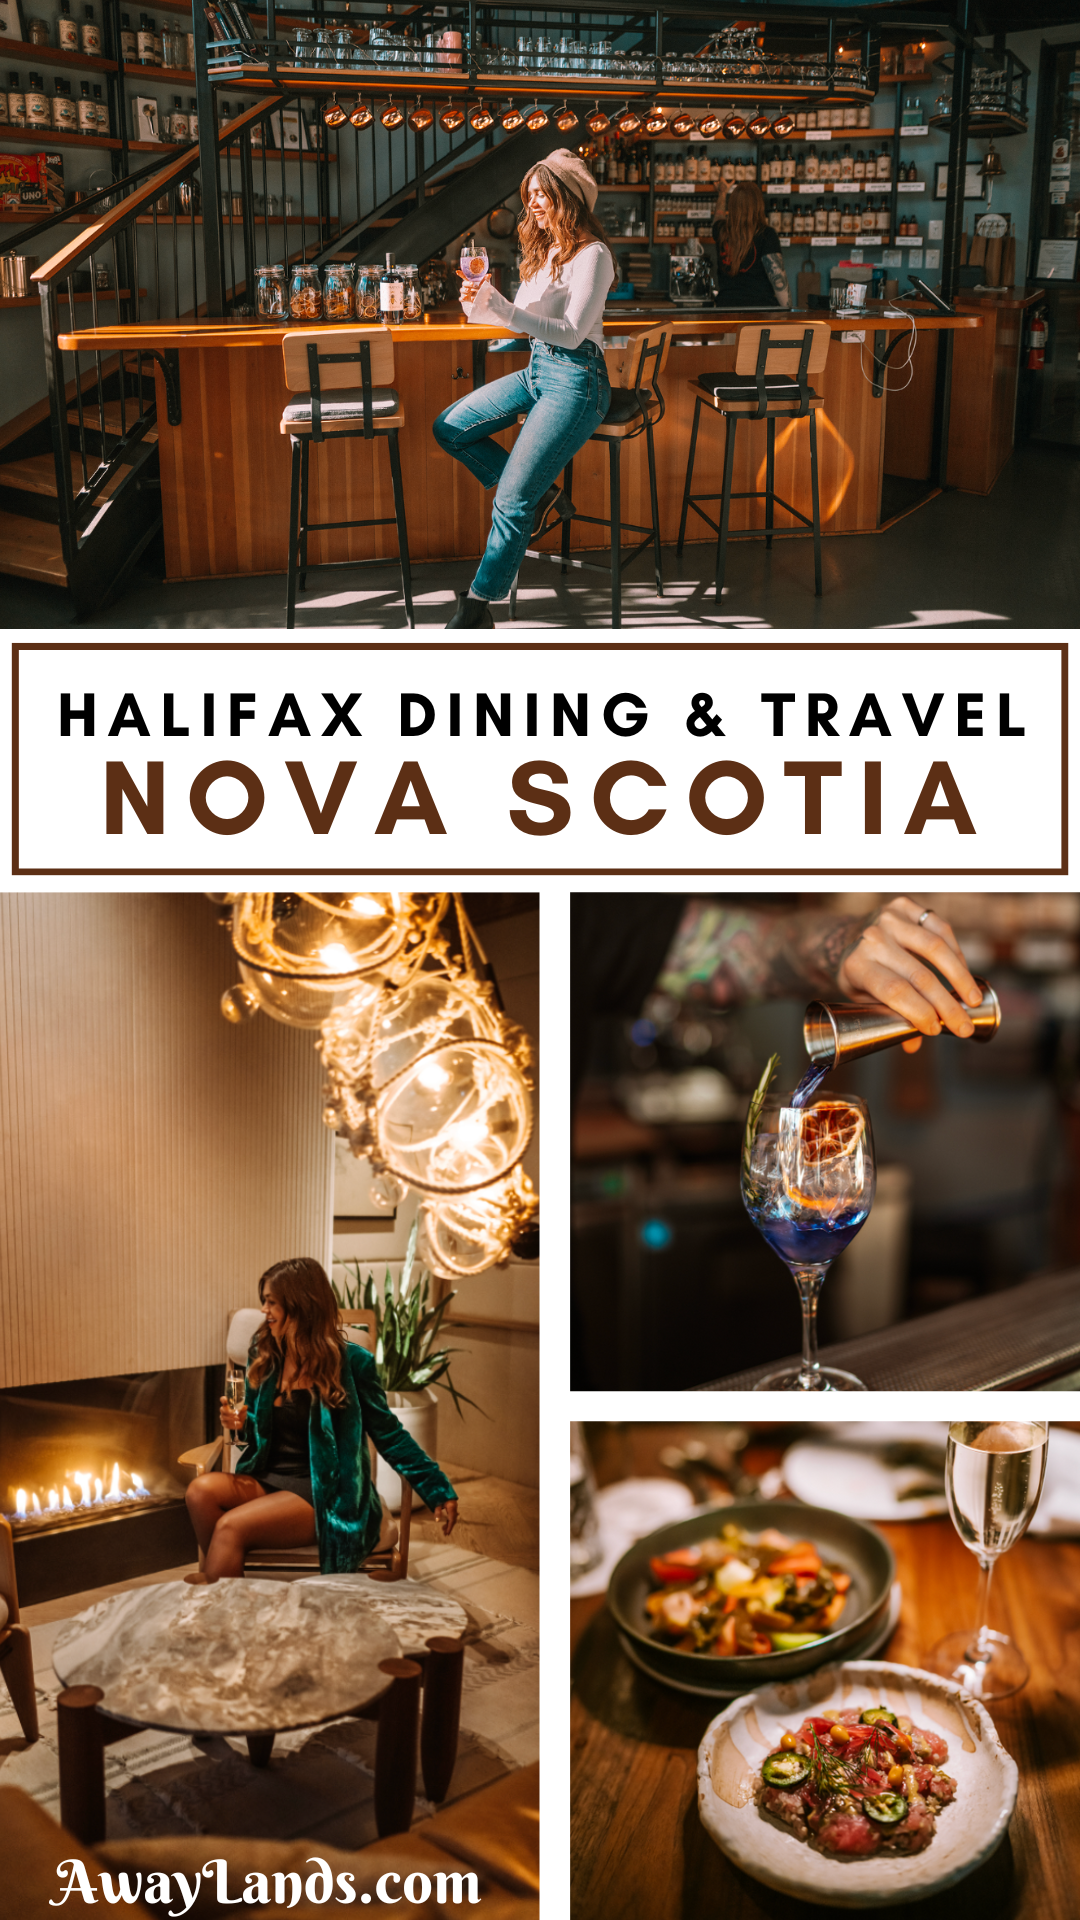 This Halifax Nova Scotia travel guide will help you decide on the best things to do in Halifax, the best places to stay in Halifax, and the best places to eat in Halifax. | what to do in Halifax | where to stay in Halifax | where to eat in Halifax | best Halifax restaurants | best things to do in halifax ns | best things to do in halifax nova scotia | halifax travel guide